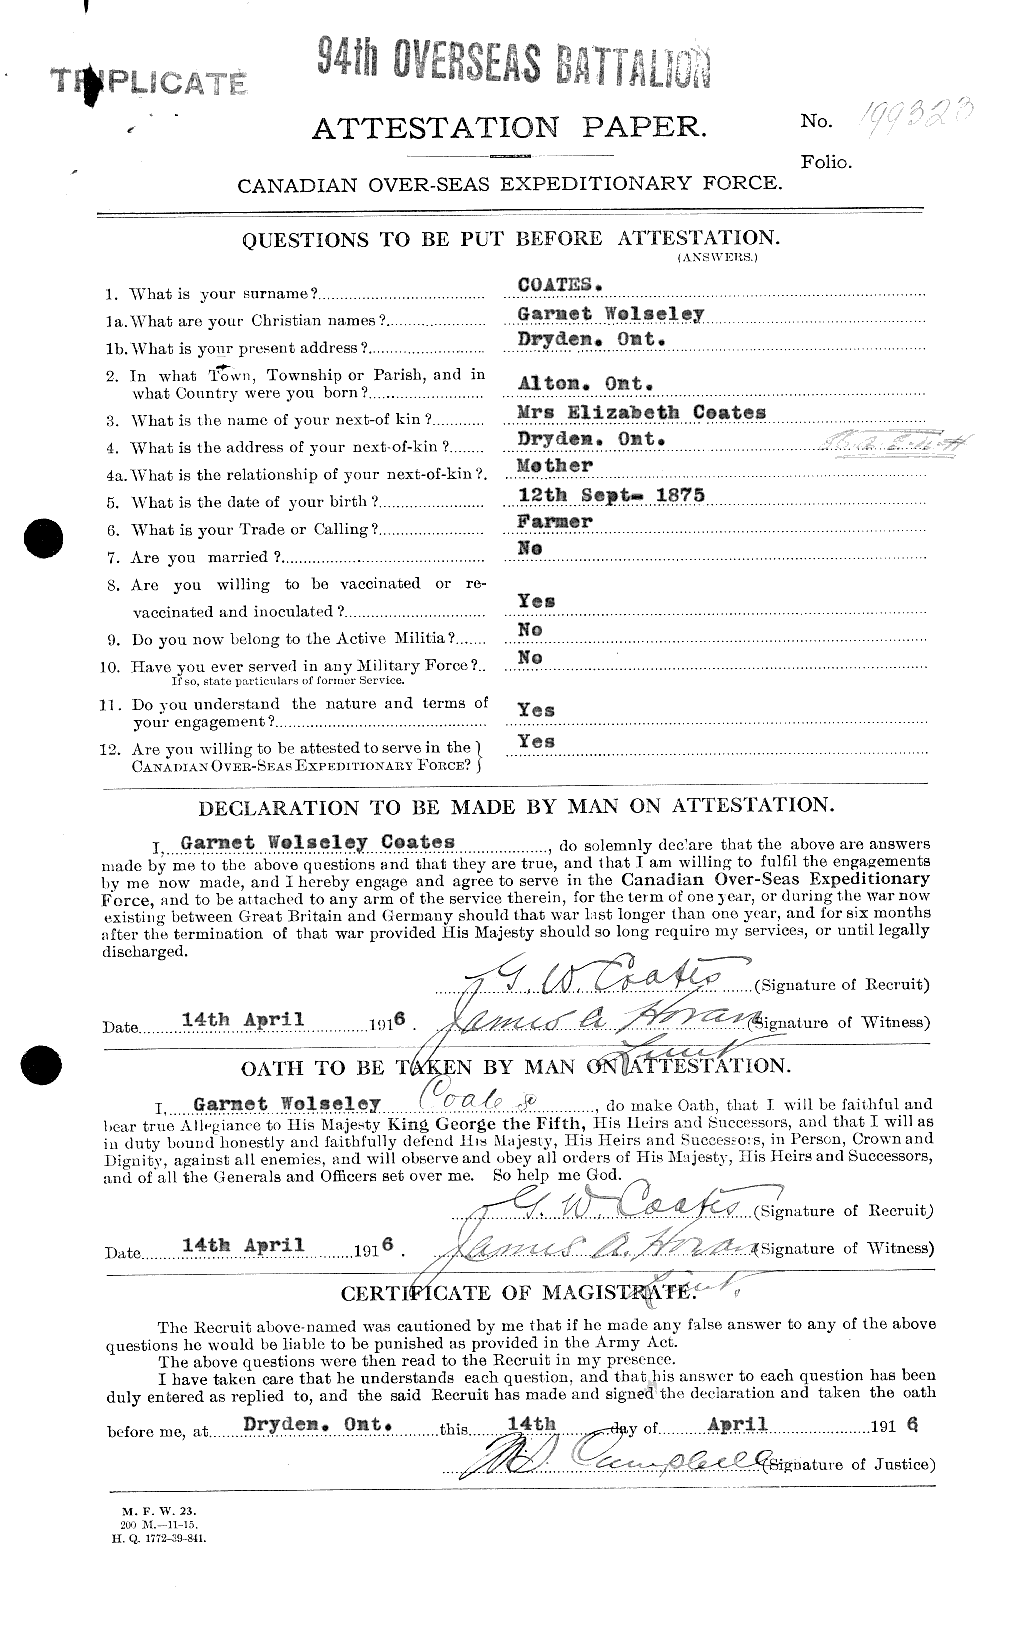 Personnel Records of the First World War - CEF 025629a